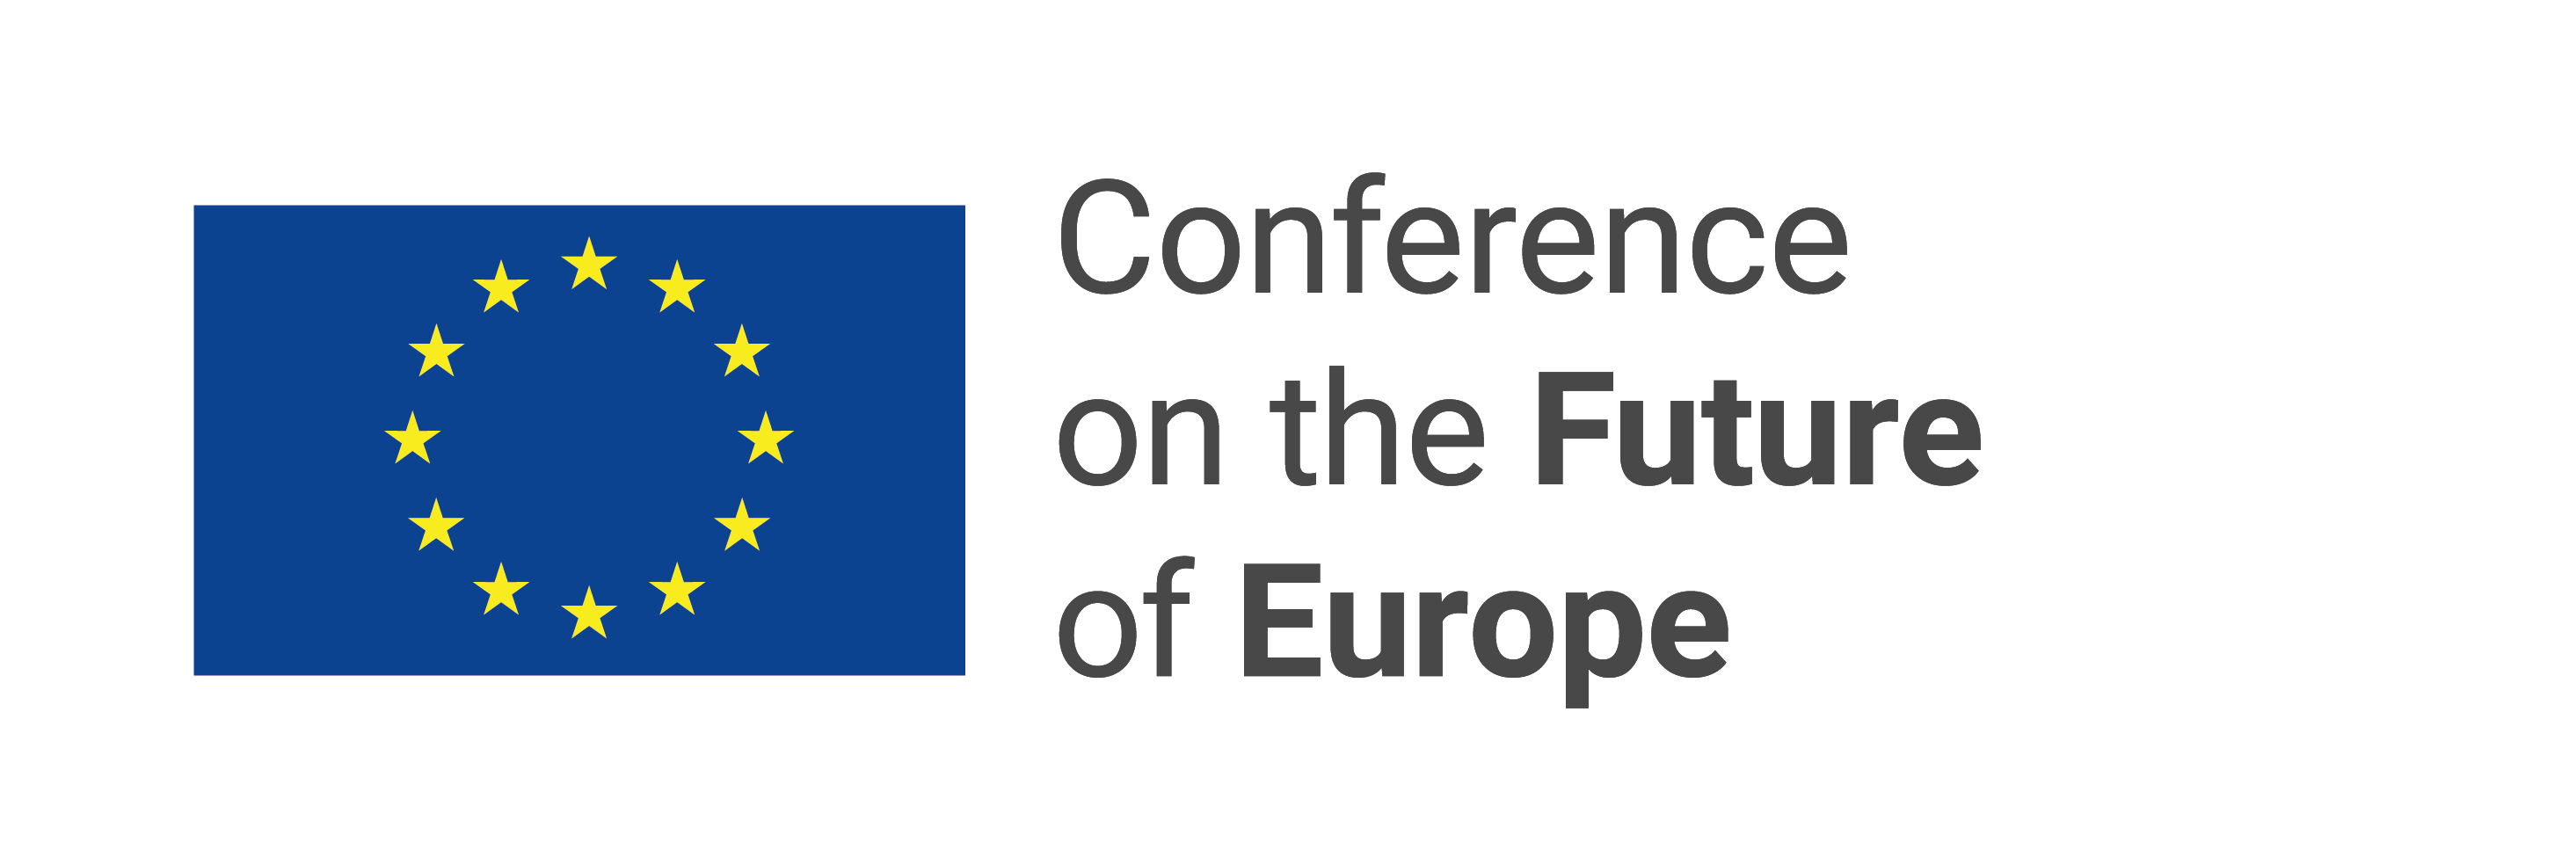 Conference on the future of Europe